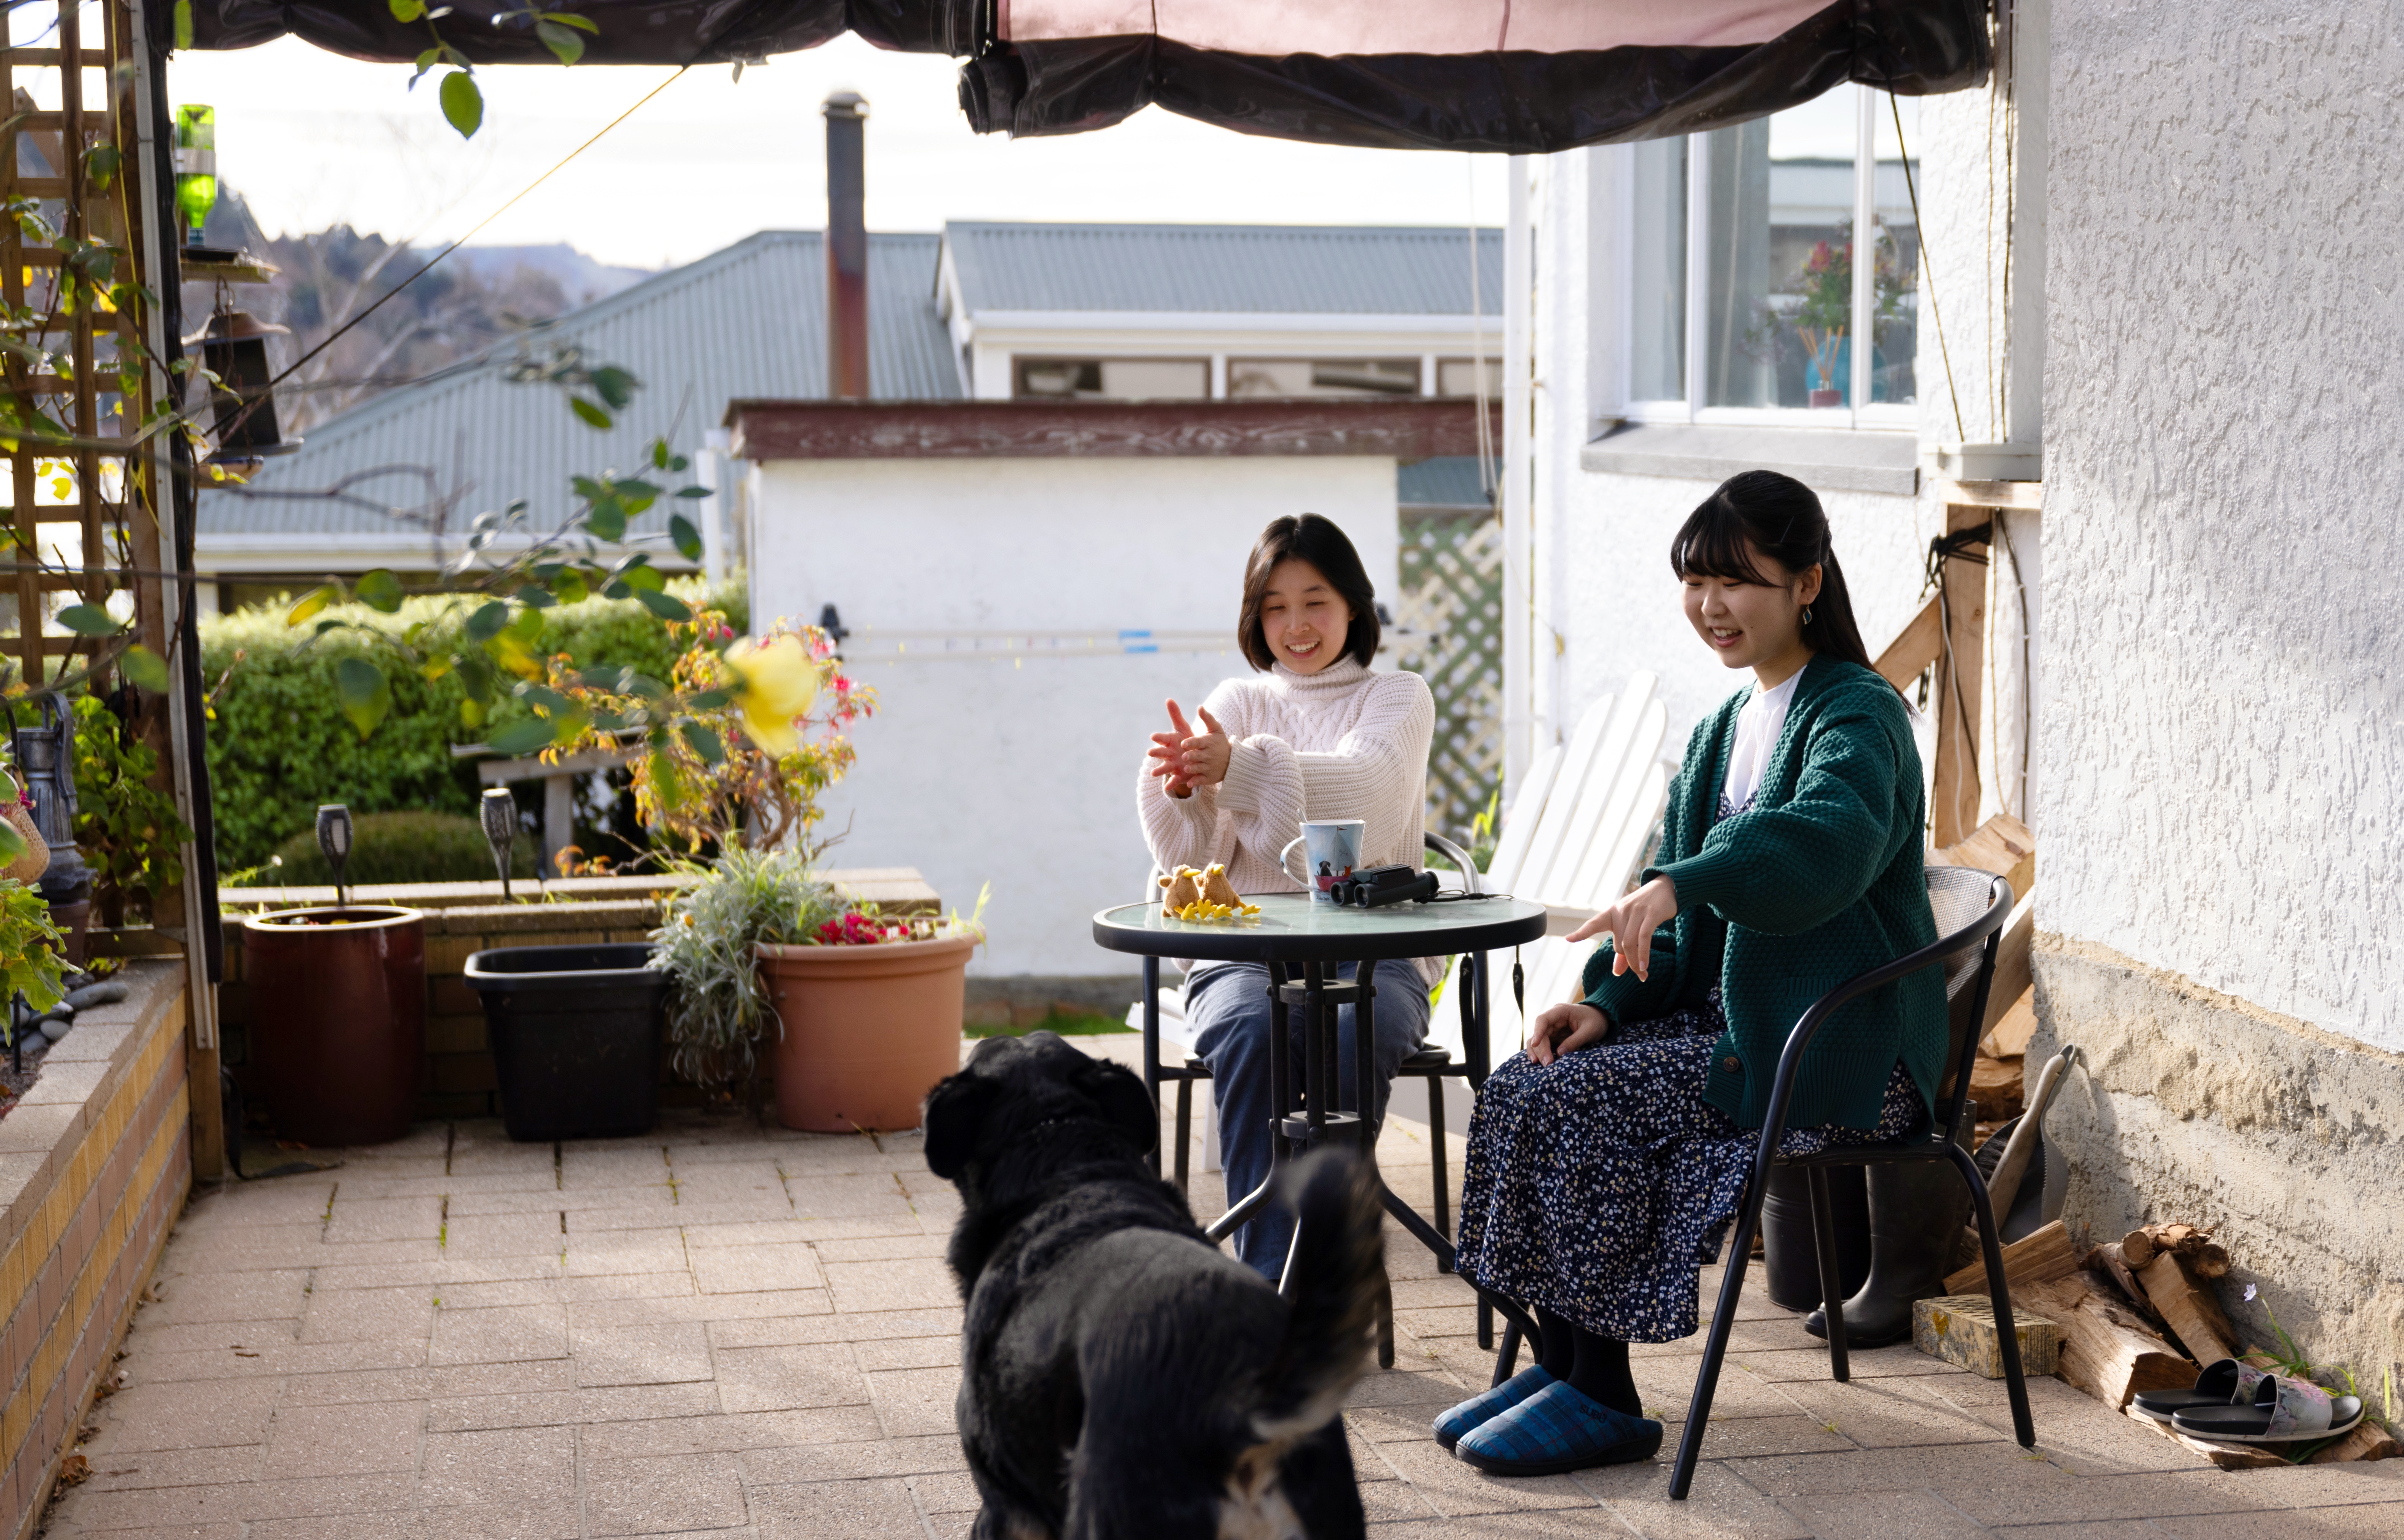 Two exchange students sitting outside on a verardah with a big black dog.